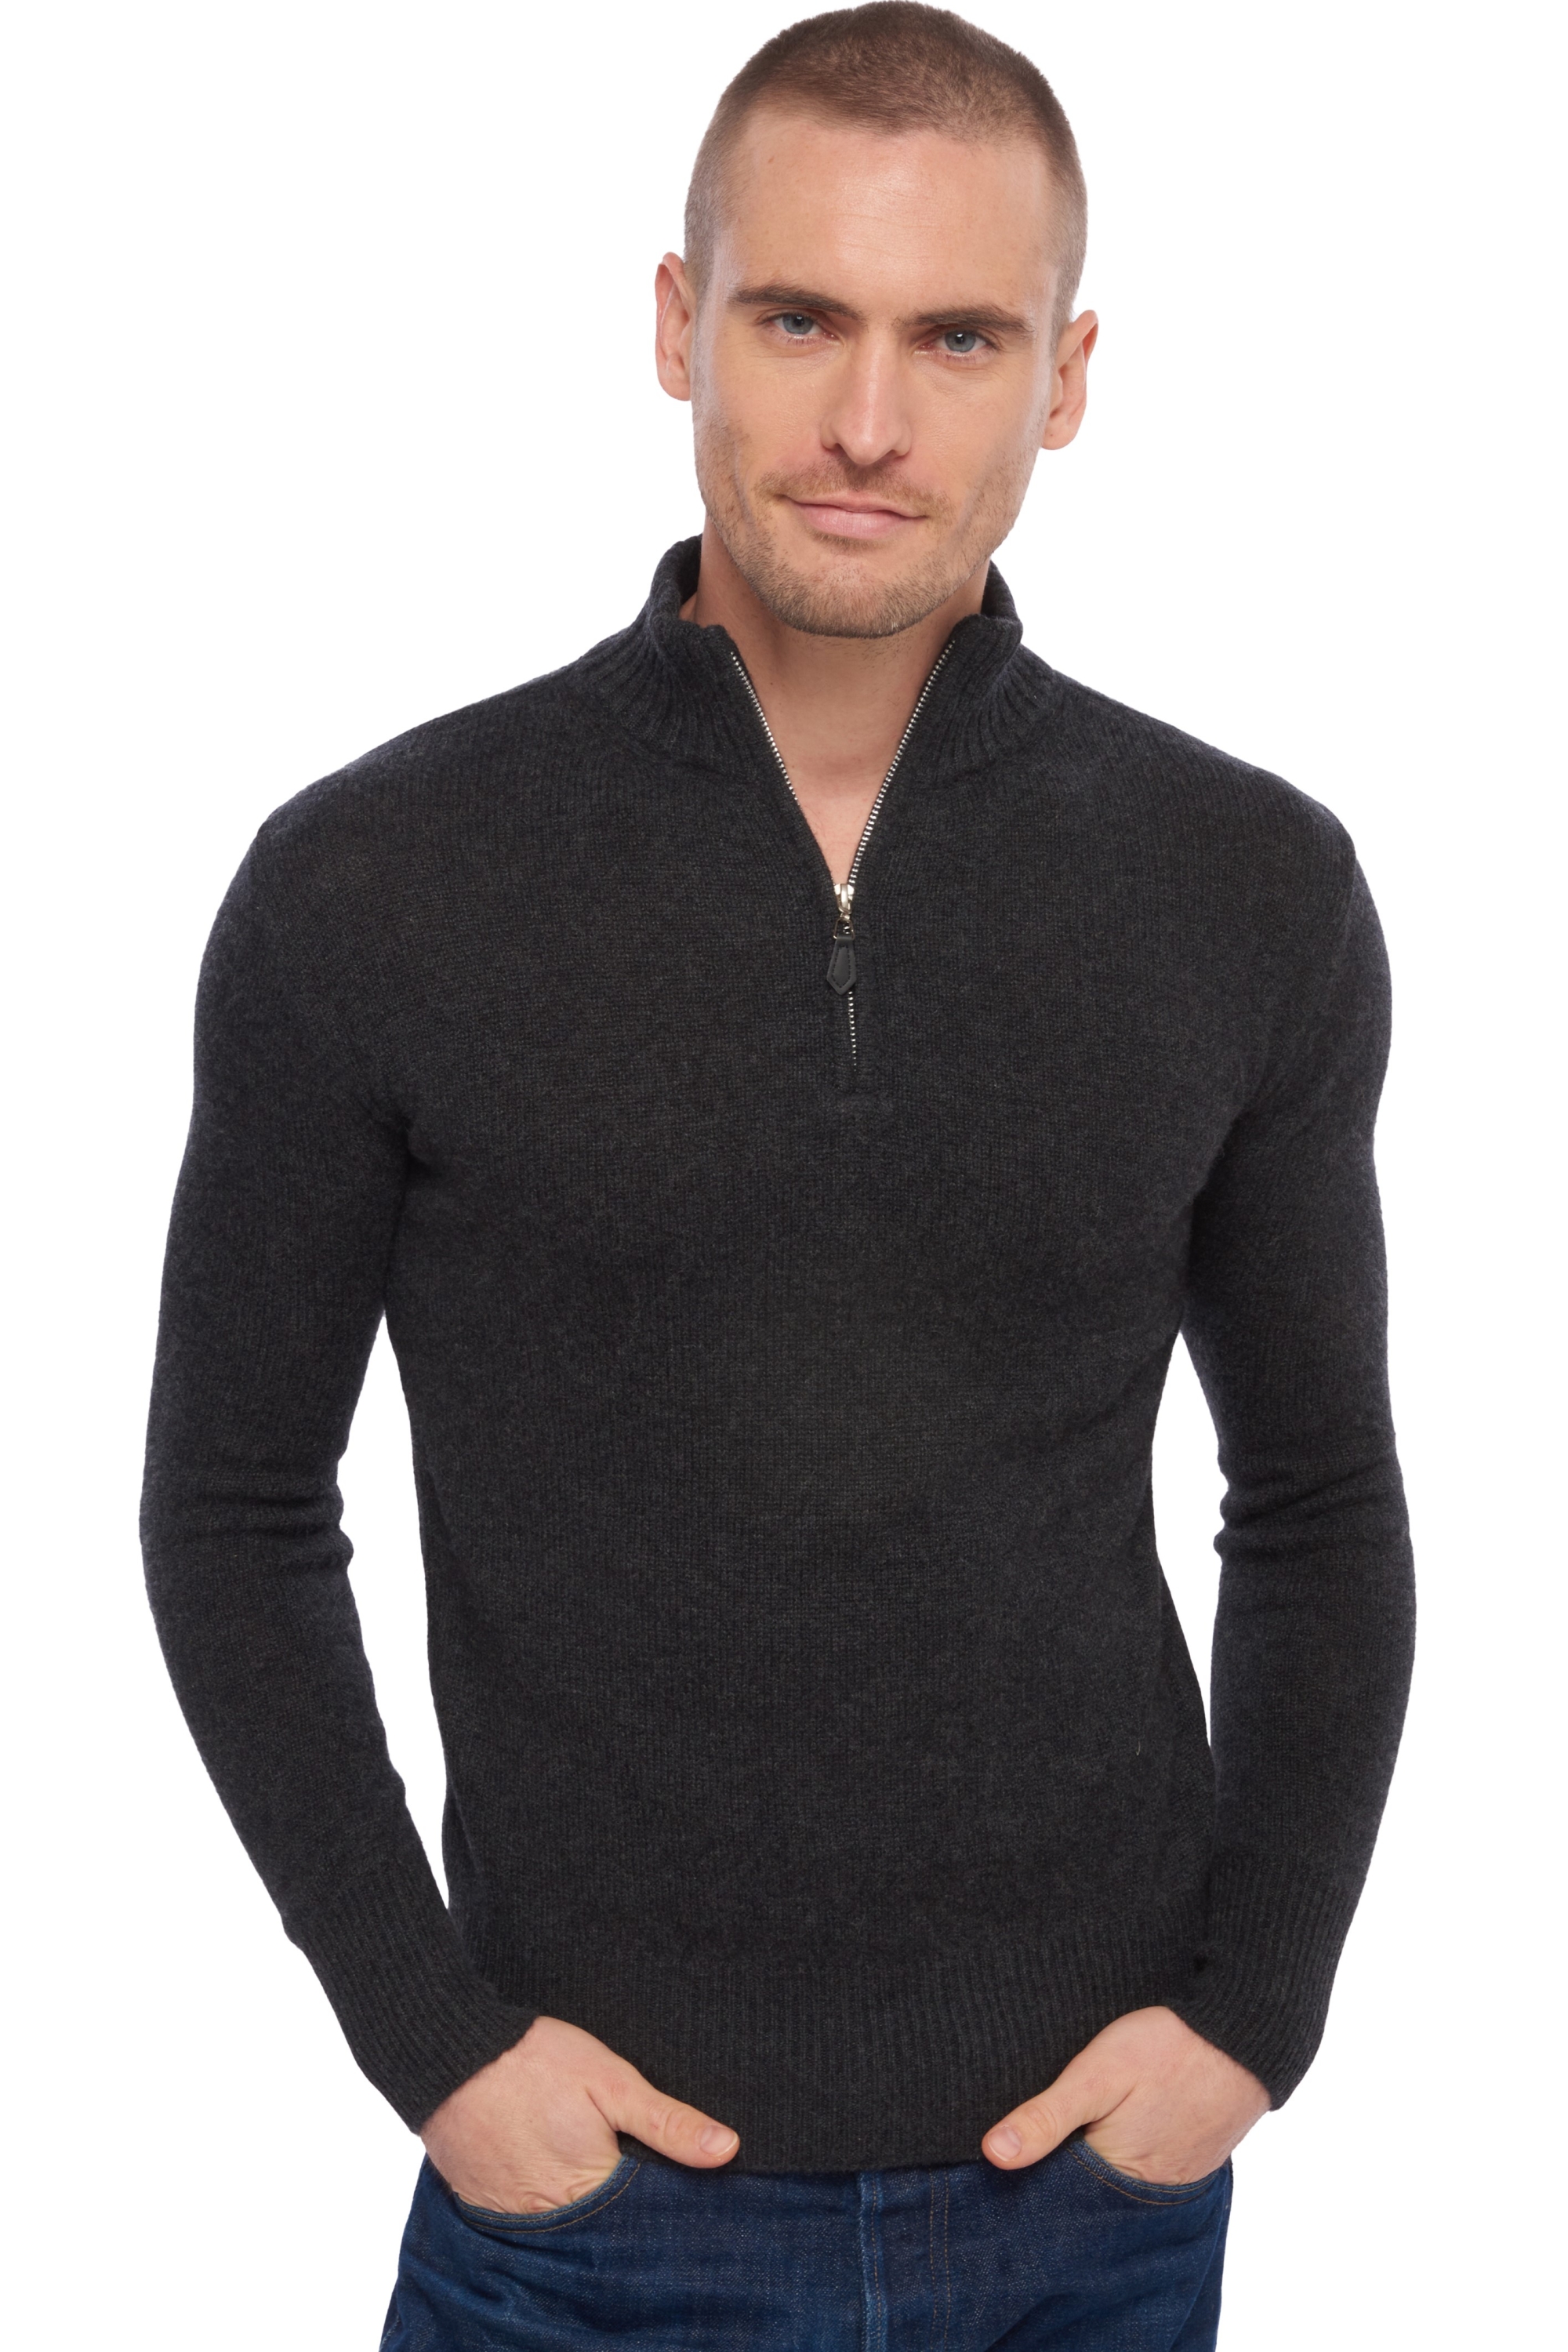 Cashmere men polo style sweaters donovan charcoal marl 2xl